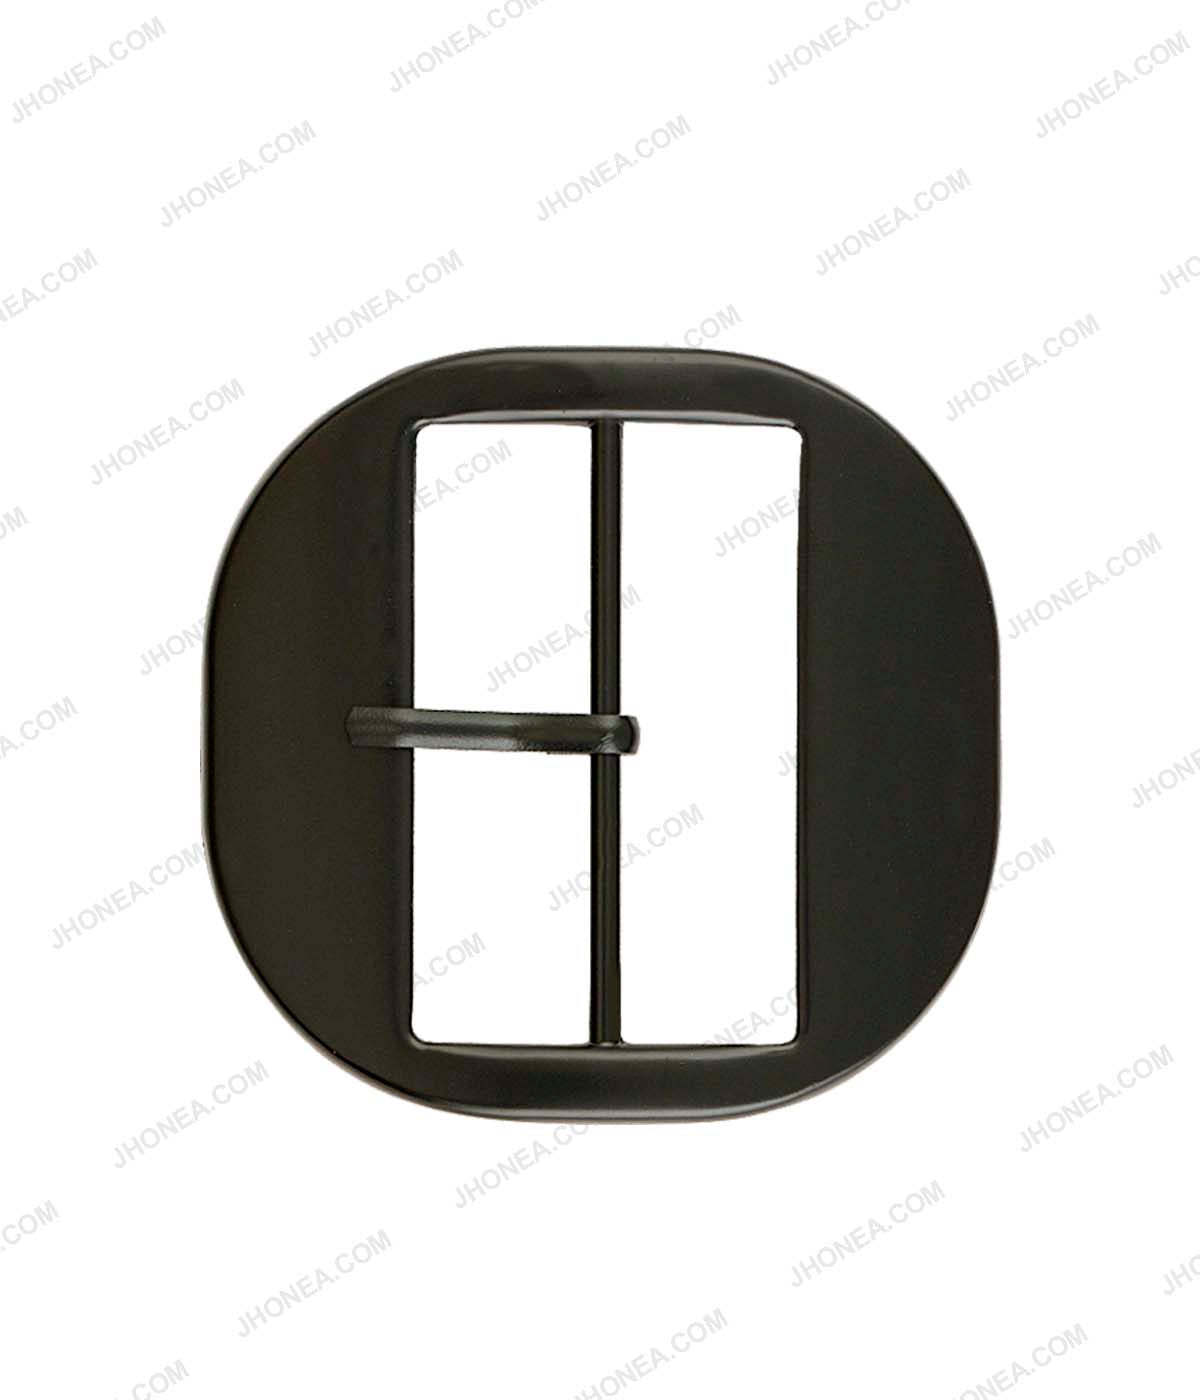 Matte Black Color Smooth Fancy Rounded Square Frame Belt Buckle with Prong